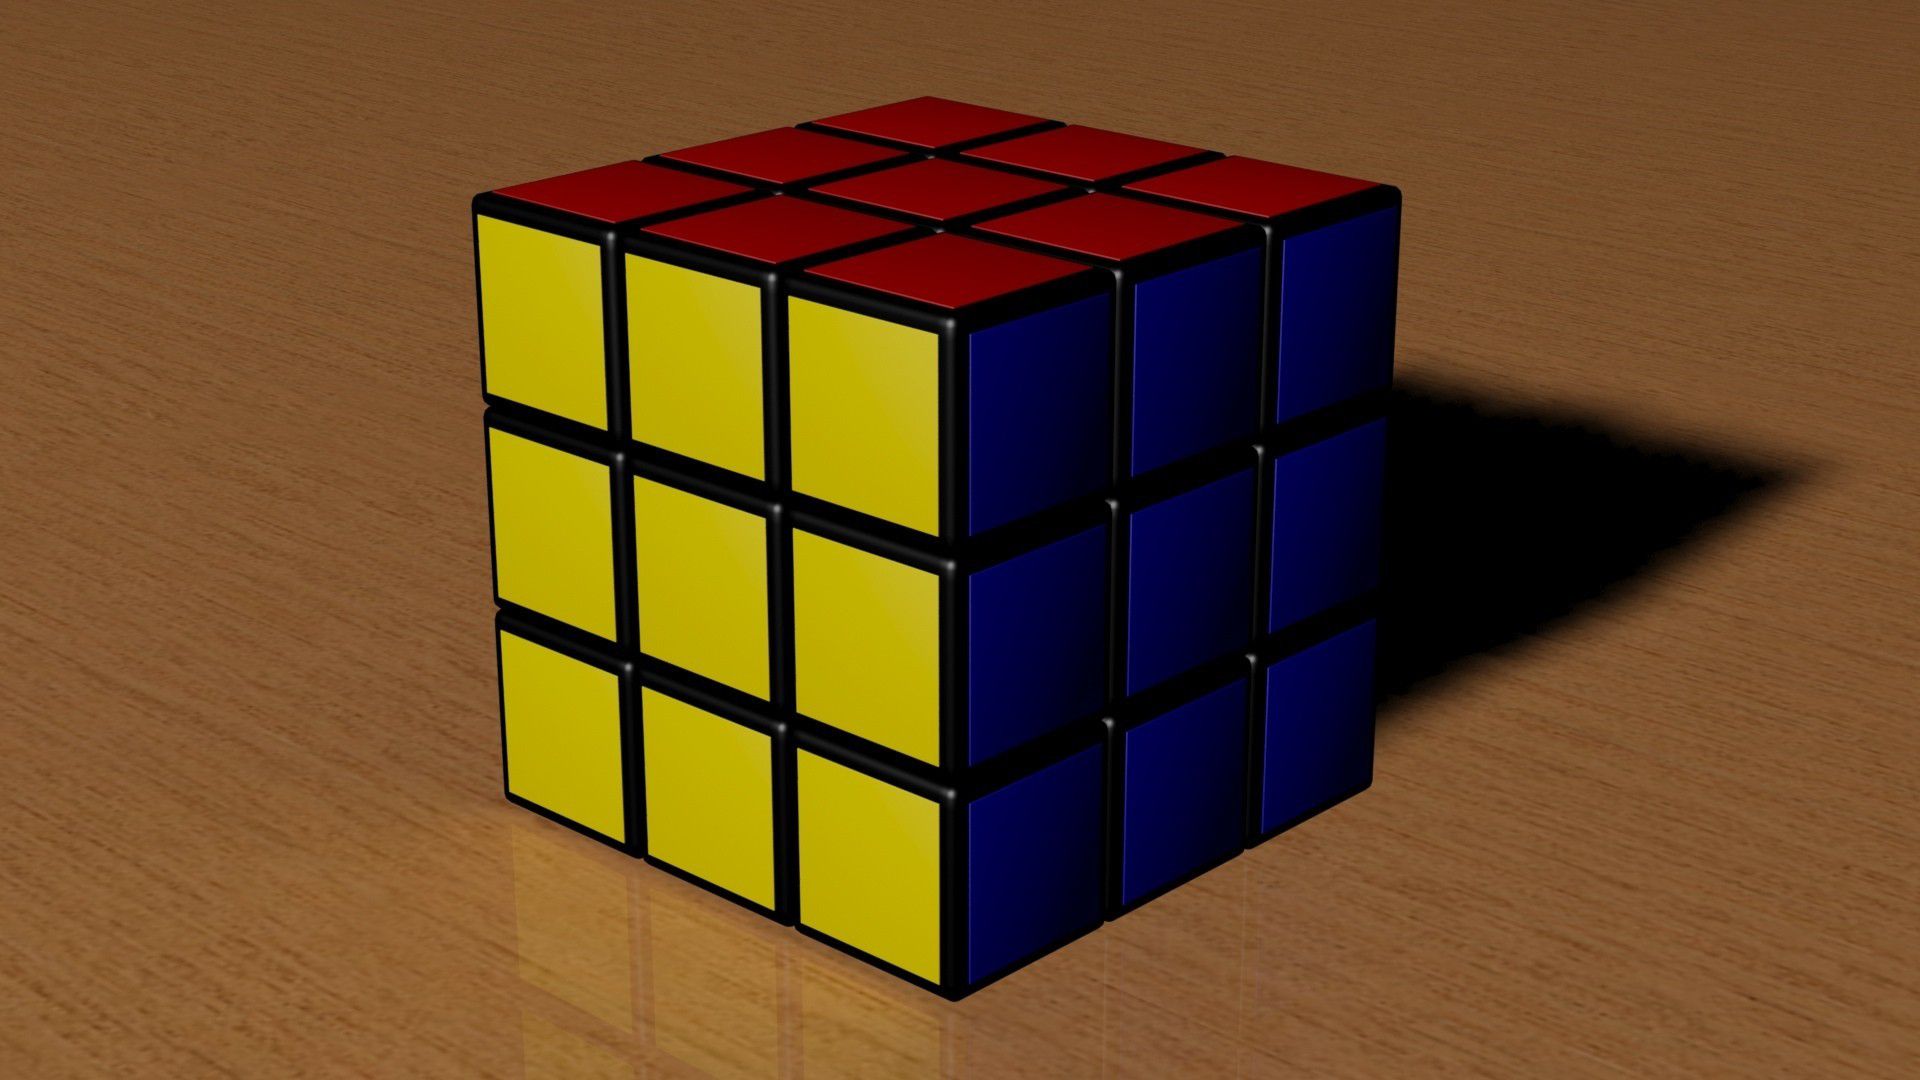 Rubik picture by Mario for containers photoshop contest  Pxleyescom